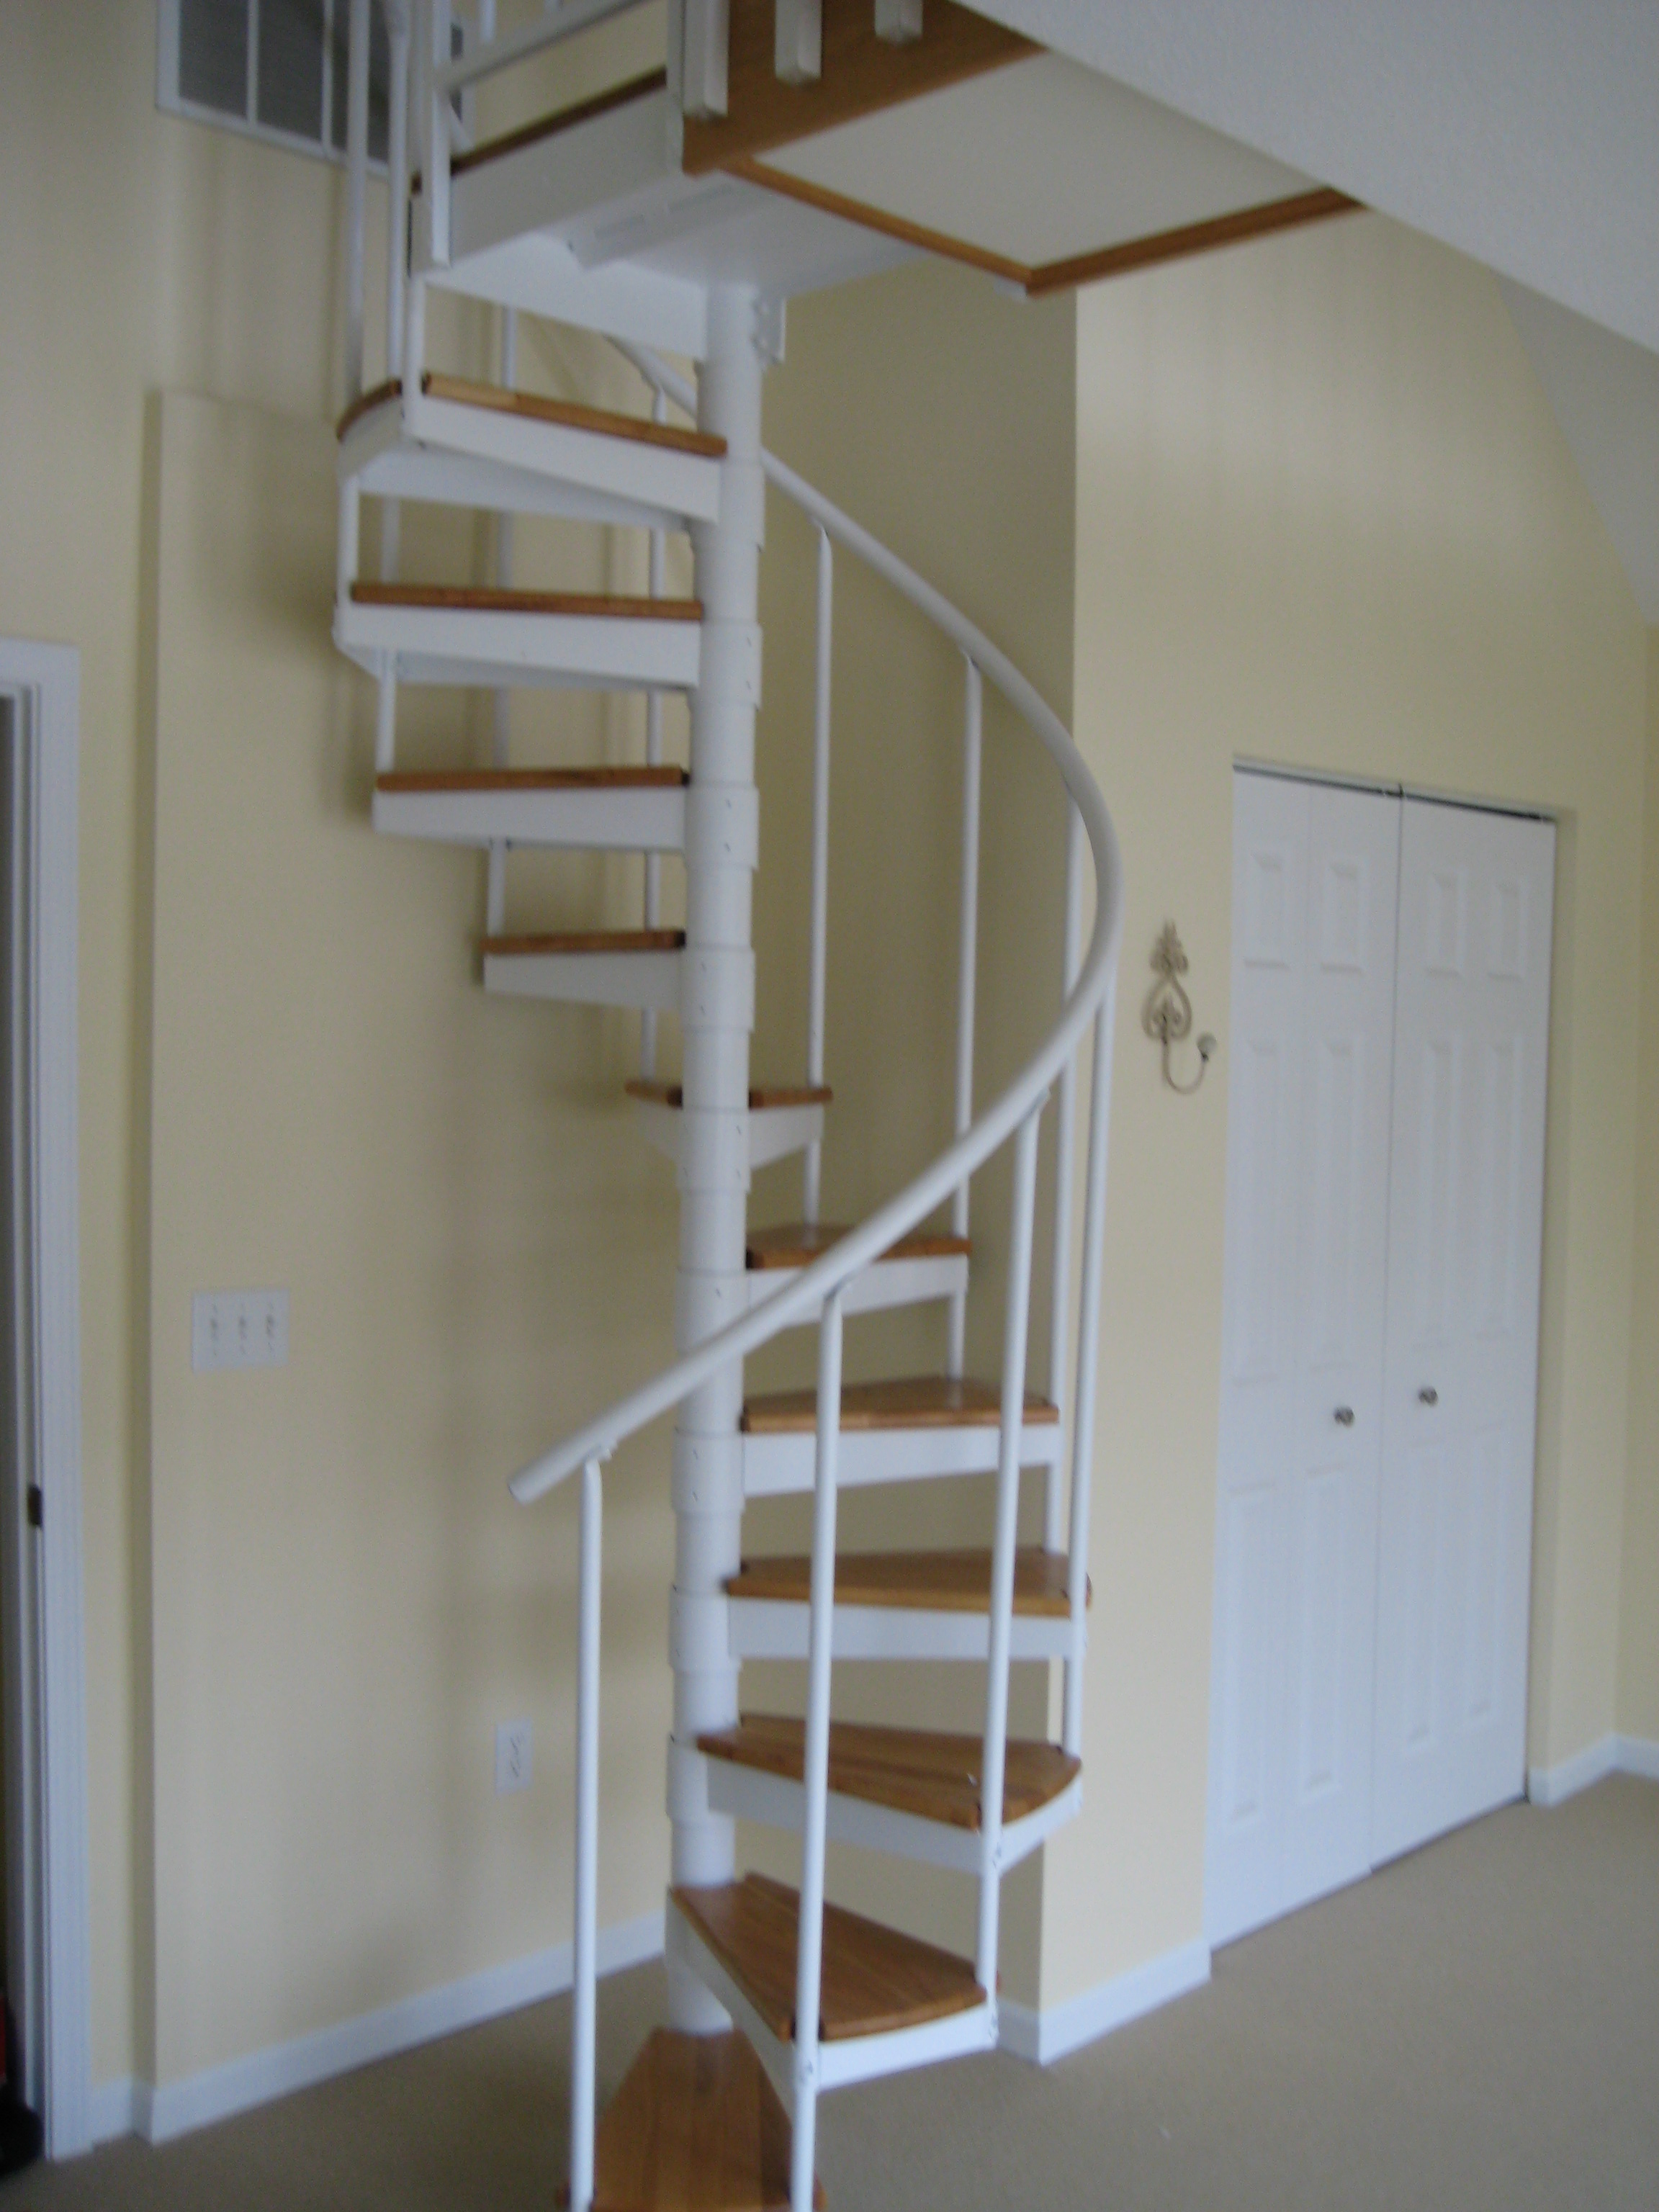 Handrails For Stairs Ladder - Stairs design Design Ideas ...